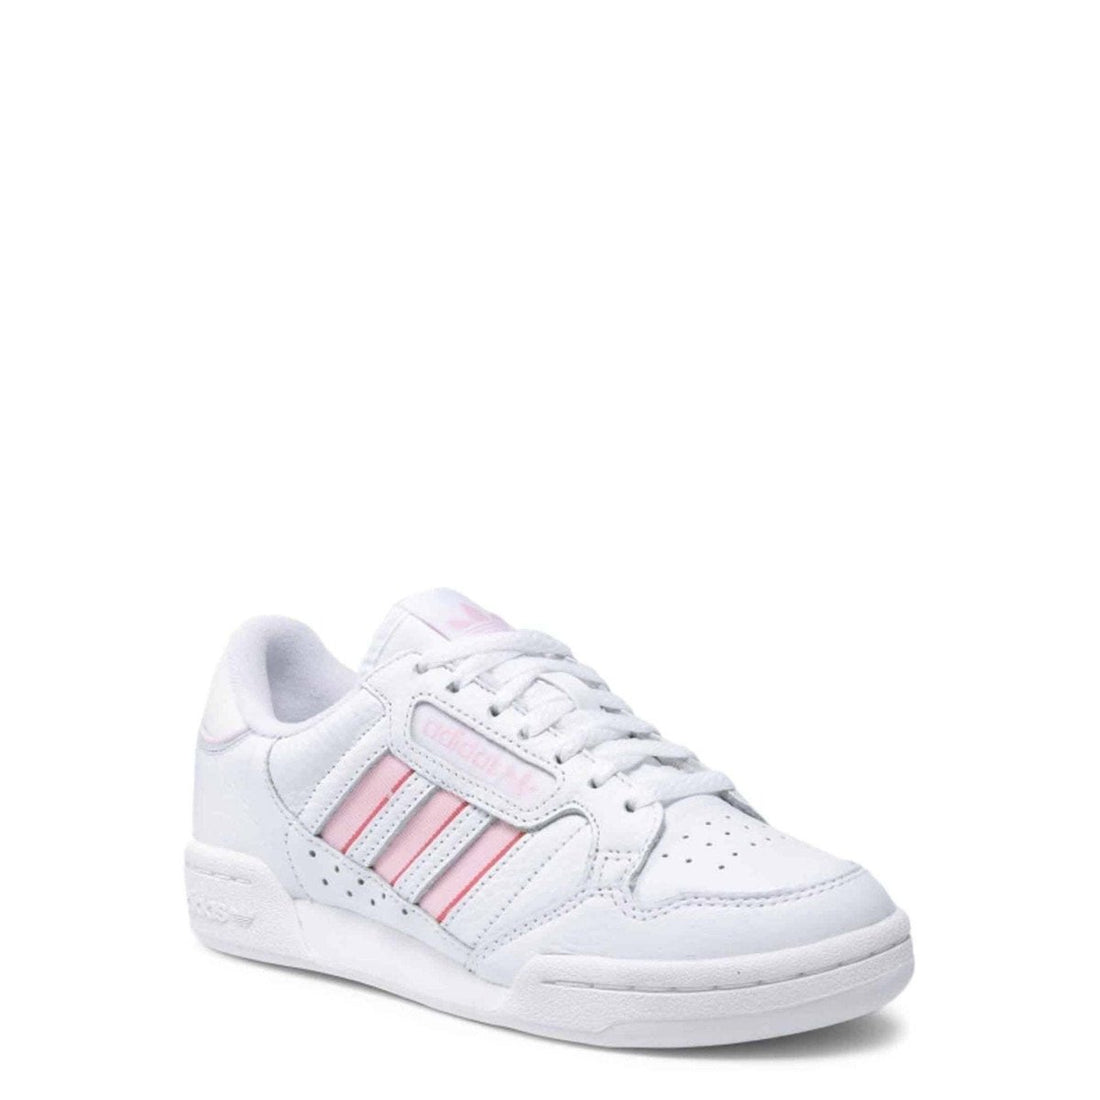 Adidas Sneakers - TINT - Sneakers - Adidas - S42625_Continental80-Stripes:349748